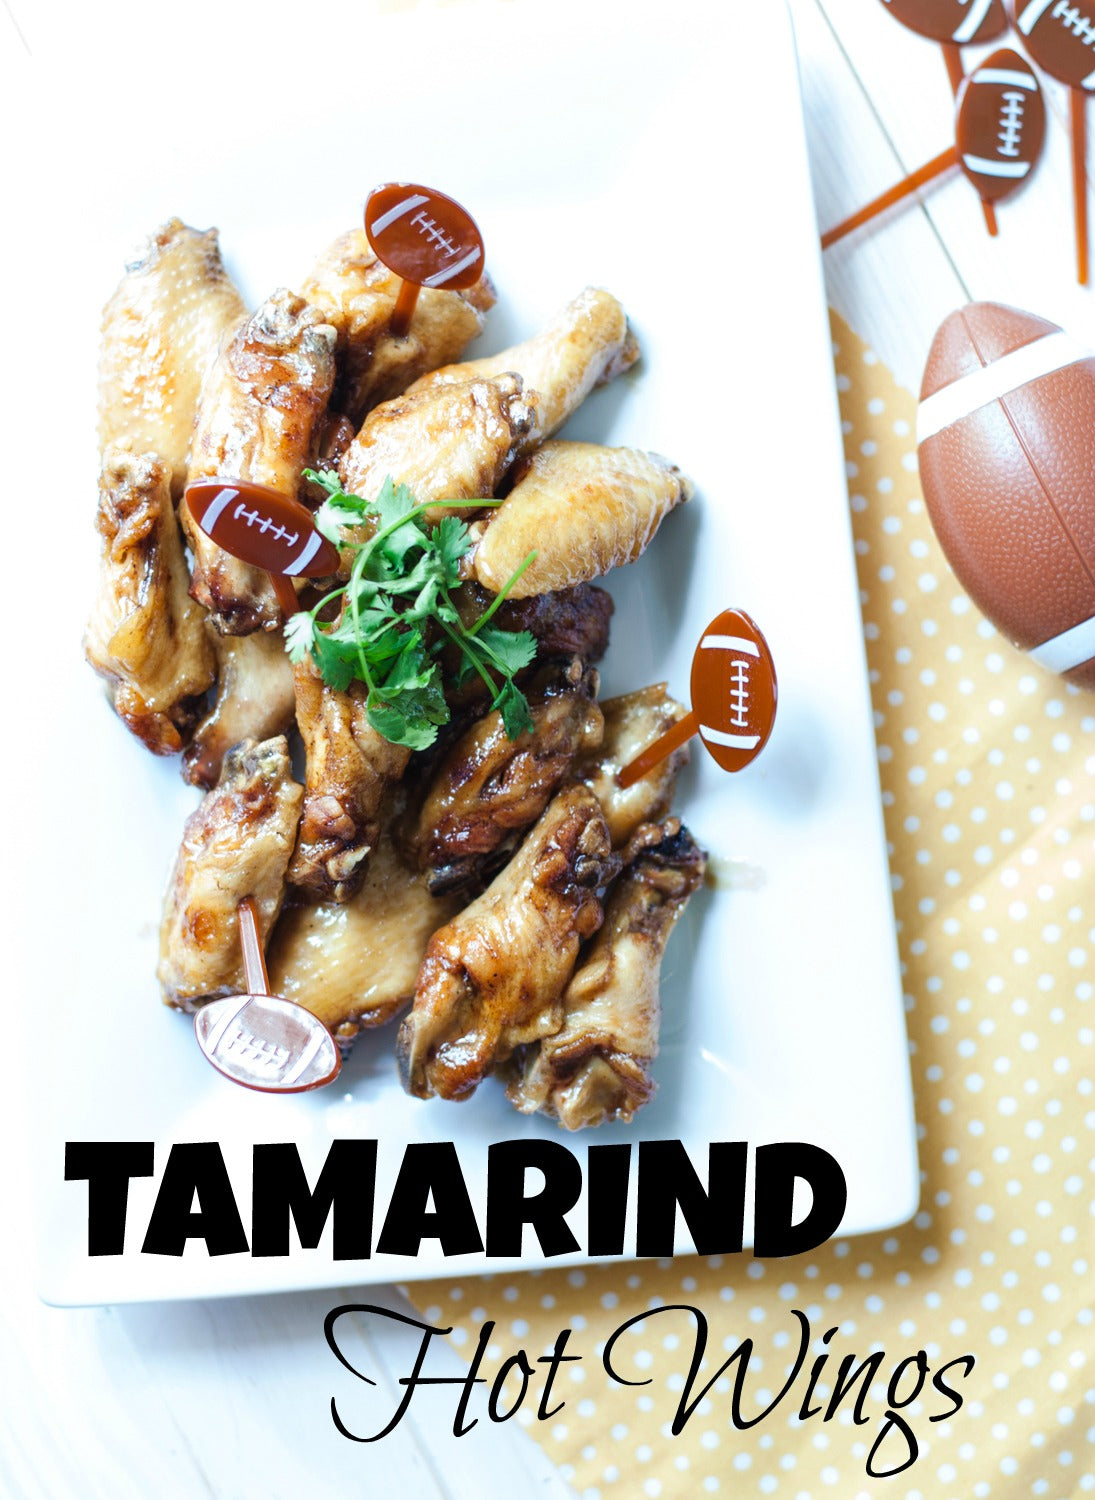 Tamarind Hot Wings for Game Day Snacks